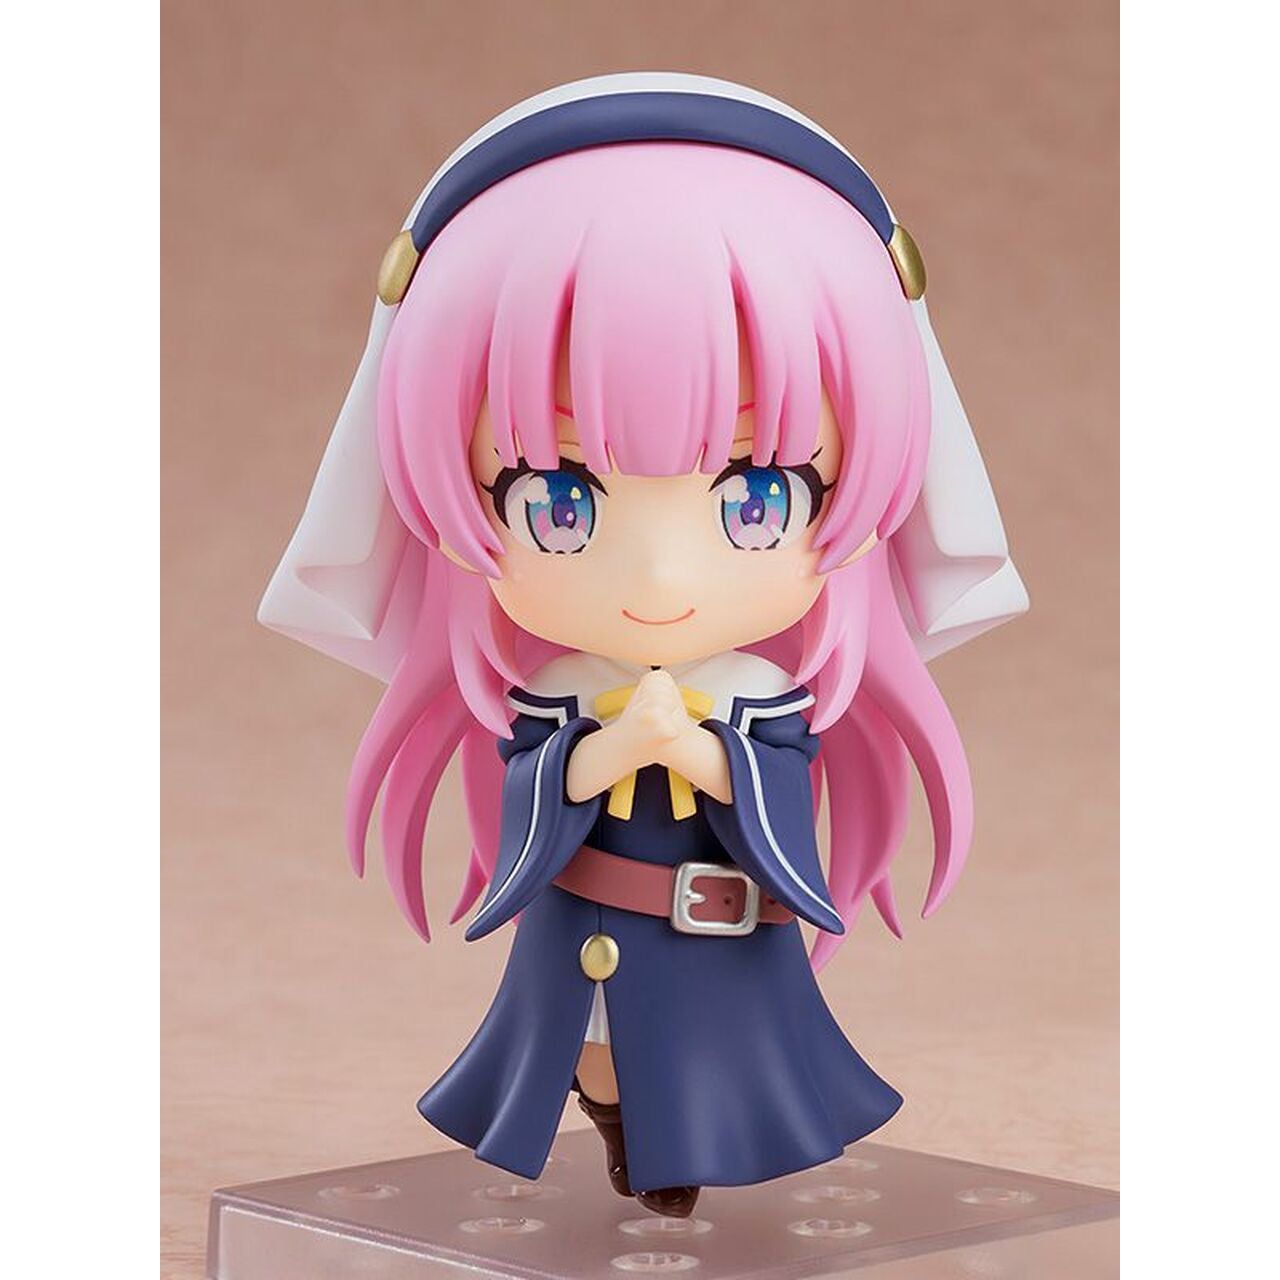 [Online Exclusive] The Day I Became a God Nendoroid Hina Sato #1544